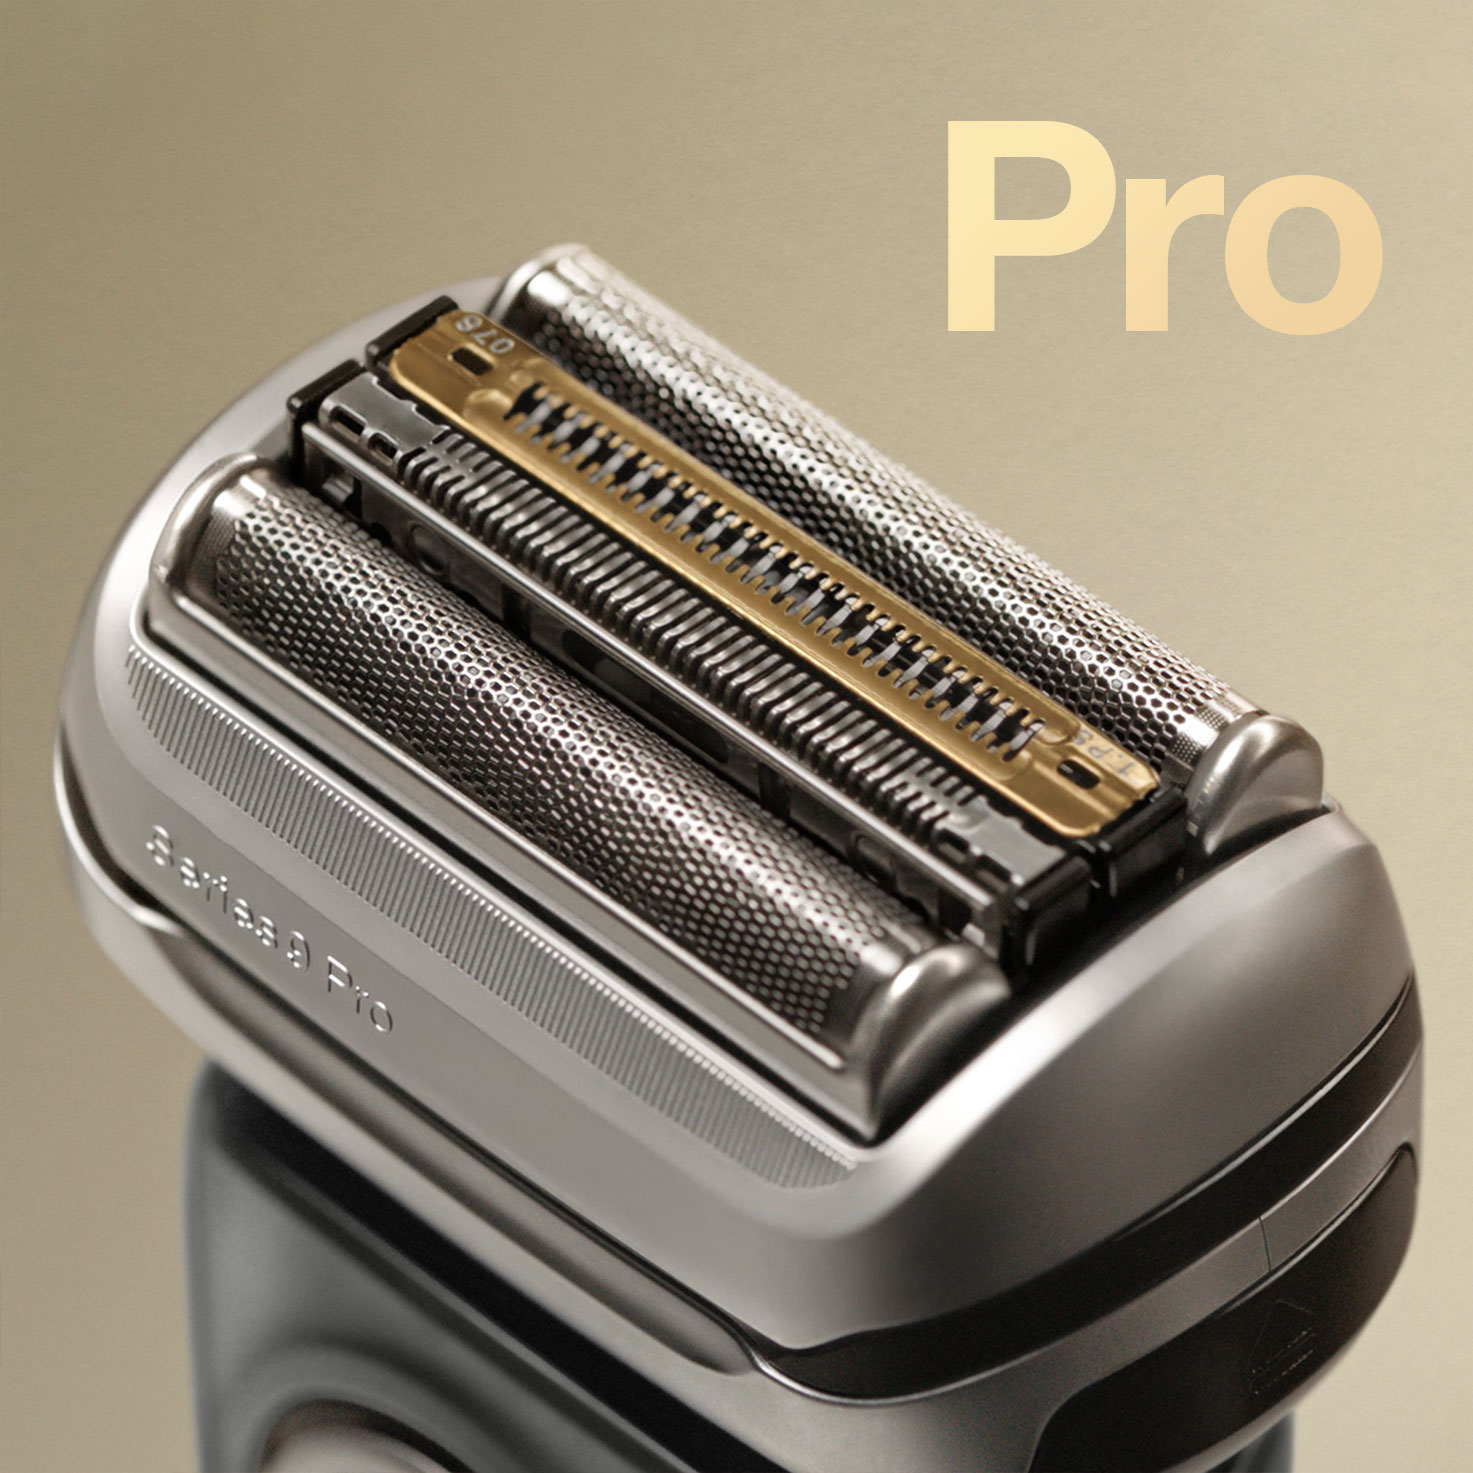 Series 9 Pro 9465cc Wet & Dry shaver with SmartCare center and 